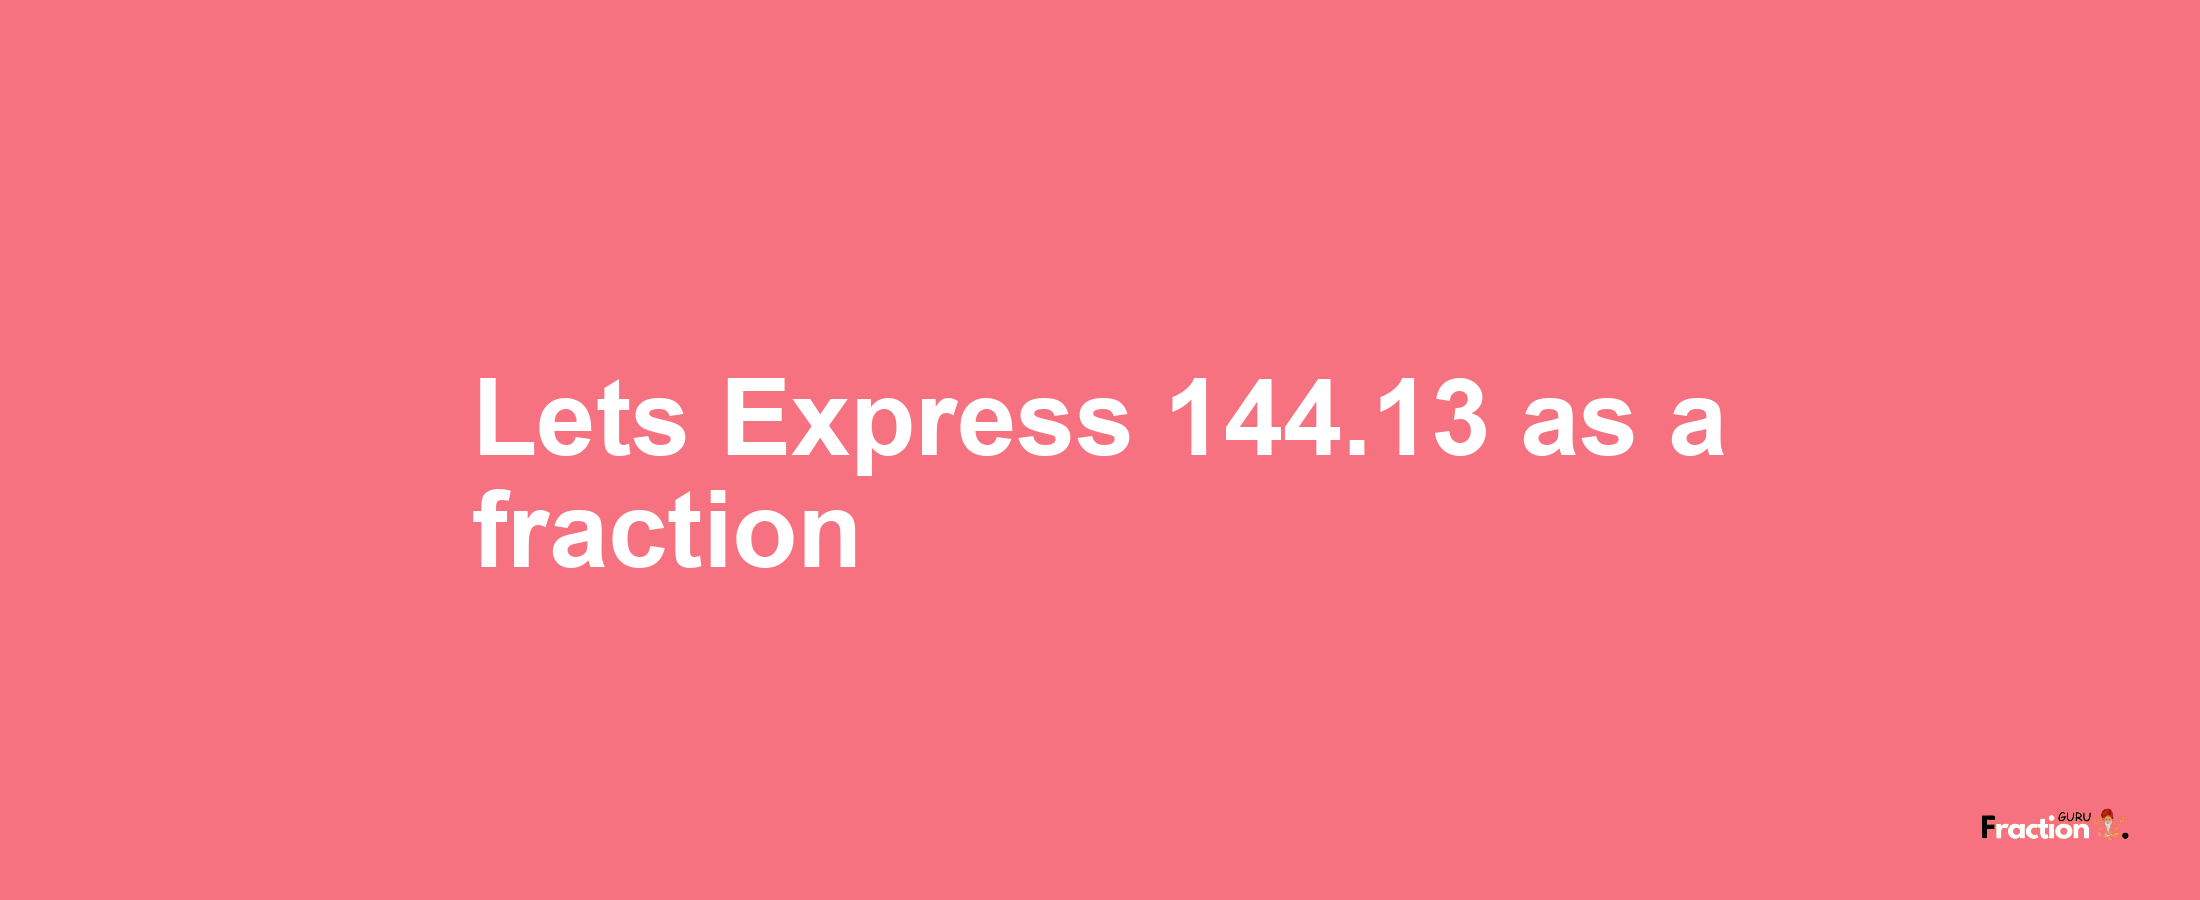 Lets Express 144.13 as afraction